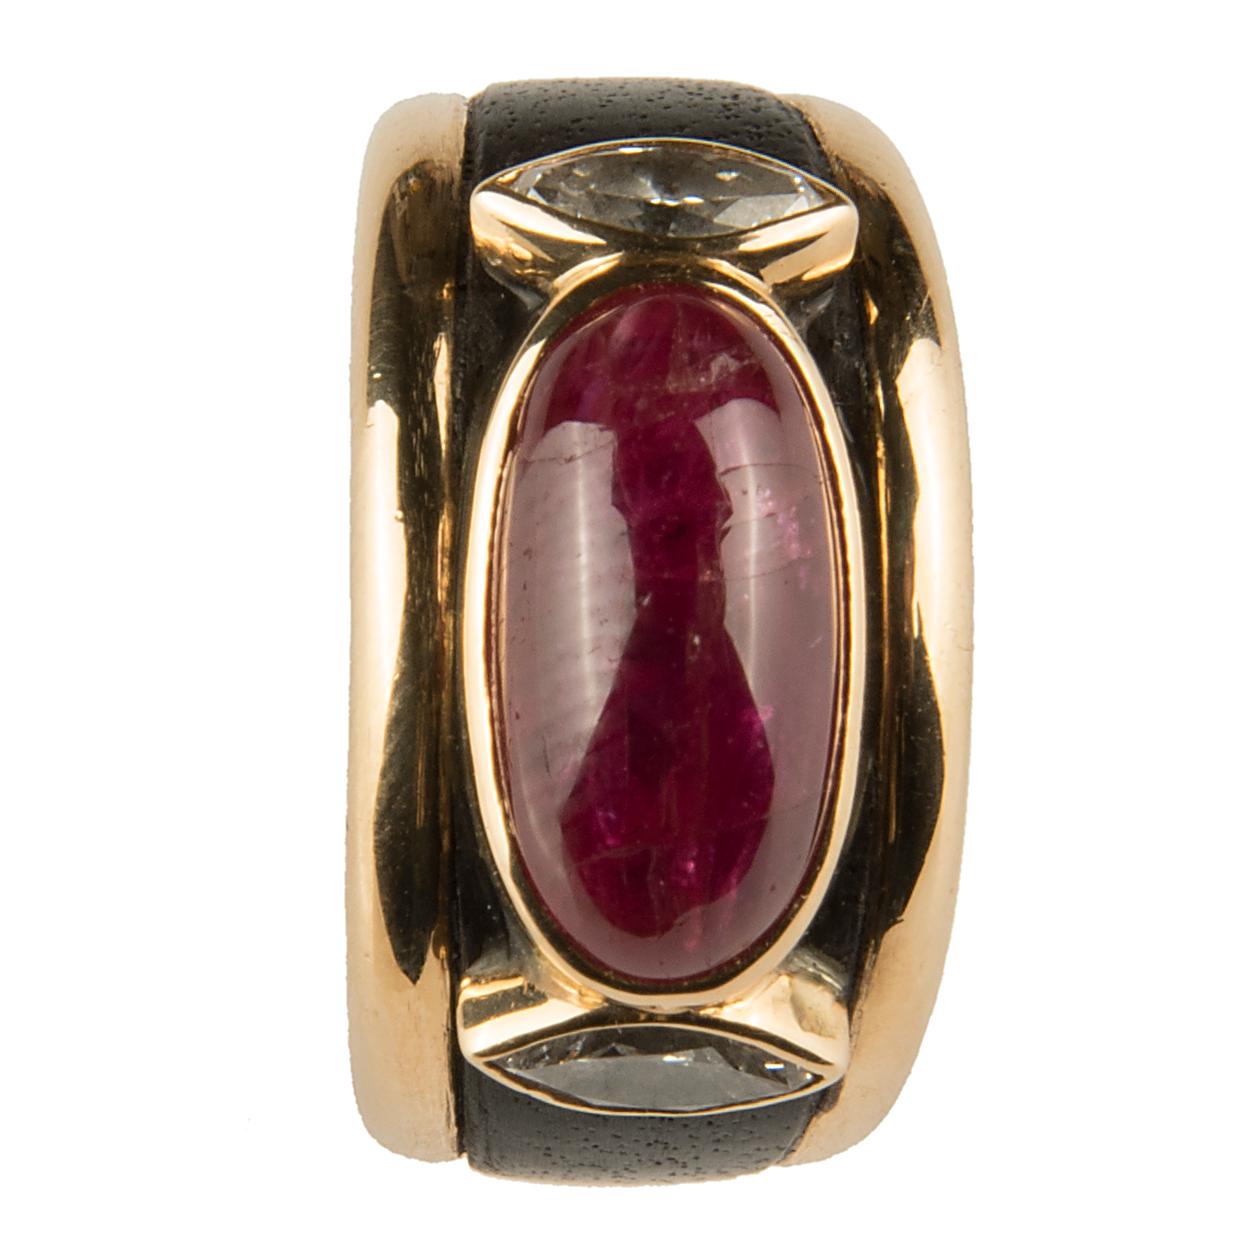 Stylish ring by Marina B (Bulgari), the 18k yellow gold band inlaid with black patinated wood, centred by an oval cabochon ruby and two marquise diamonds
Signed Marina B, maker's mark, French hallmarks and numbered 15/127
Ring size EU: 50-51, US: